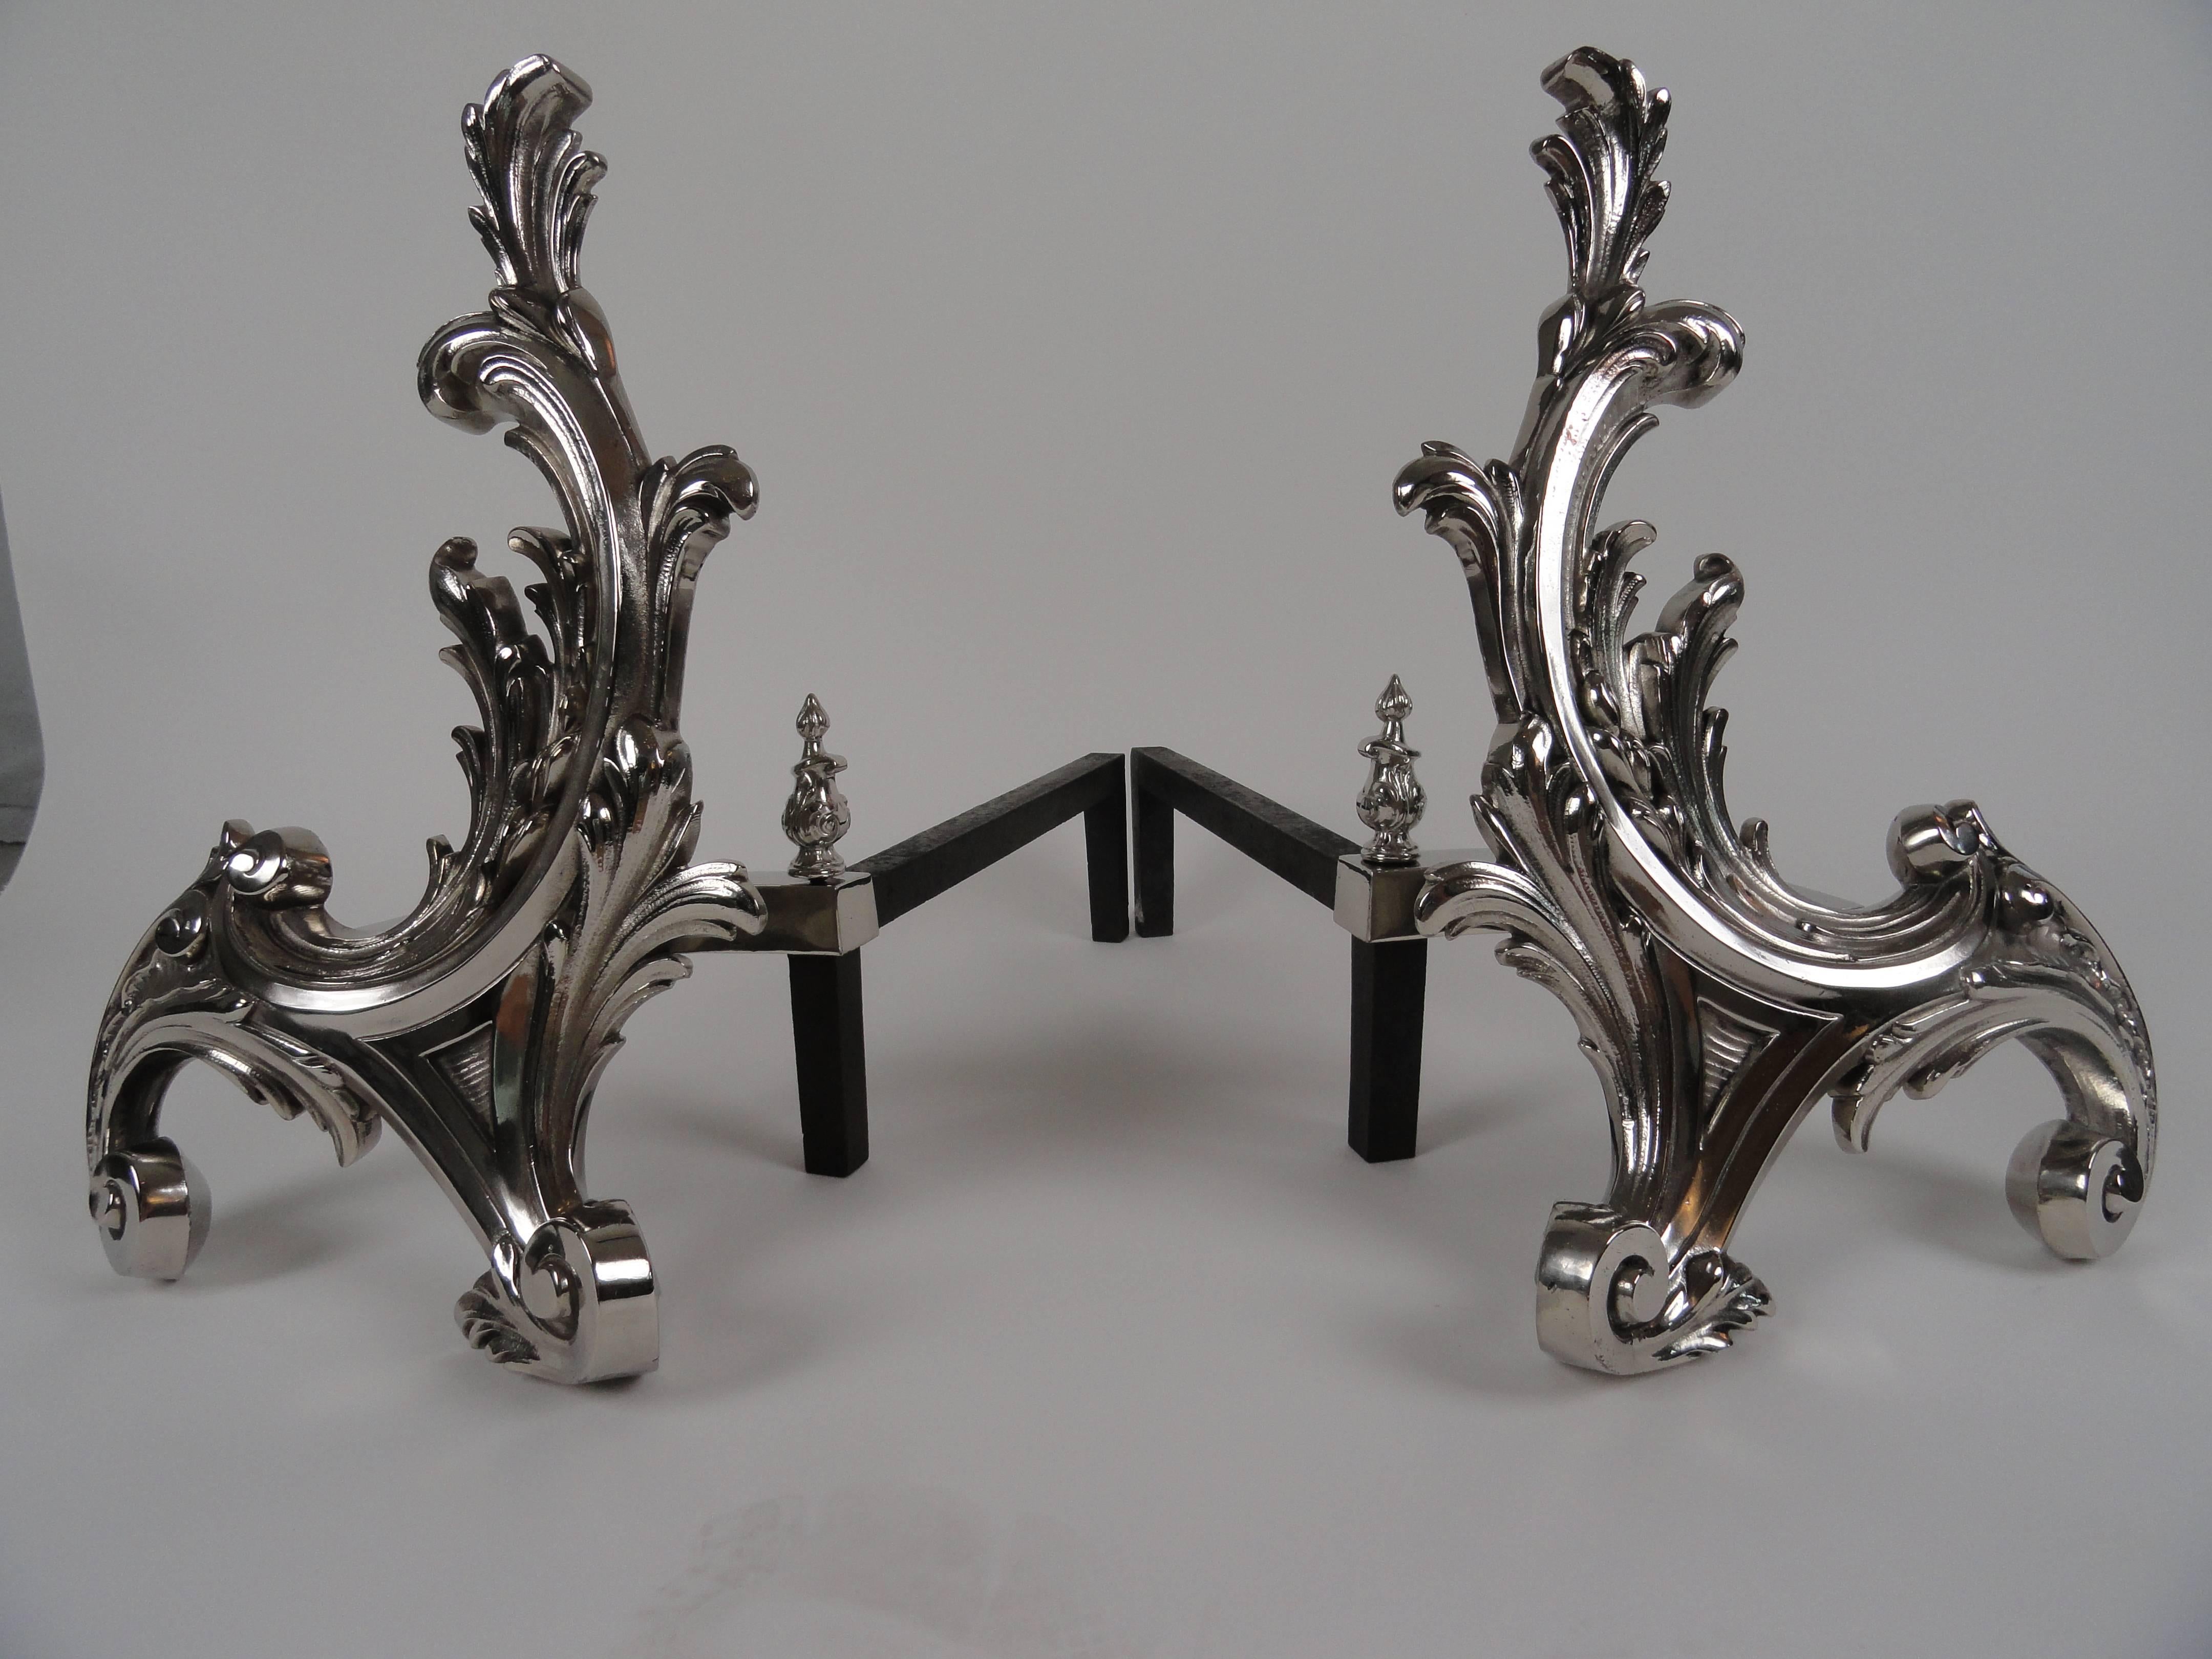 Pair of French, 19th century Rococo-style chenets. Brass andirons with polished nickel finish. Imported from France by William Jackson of New York.